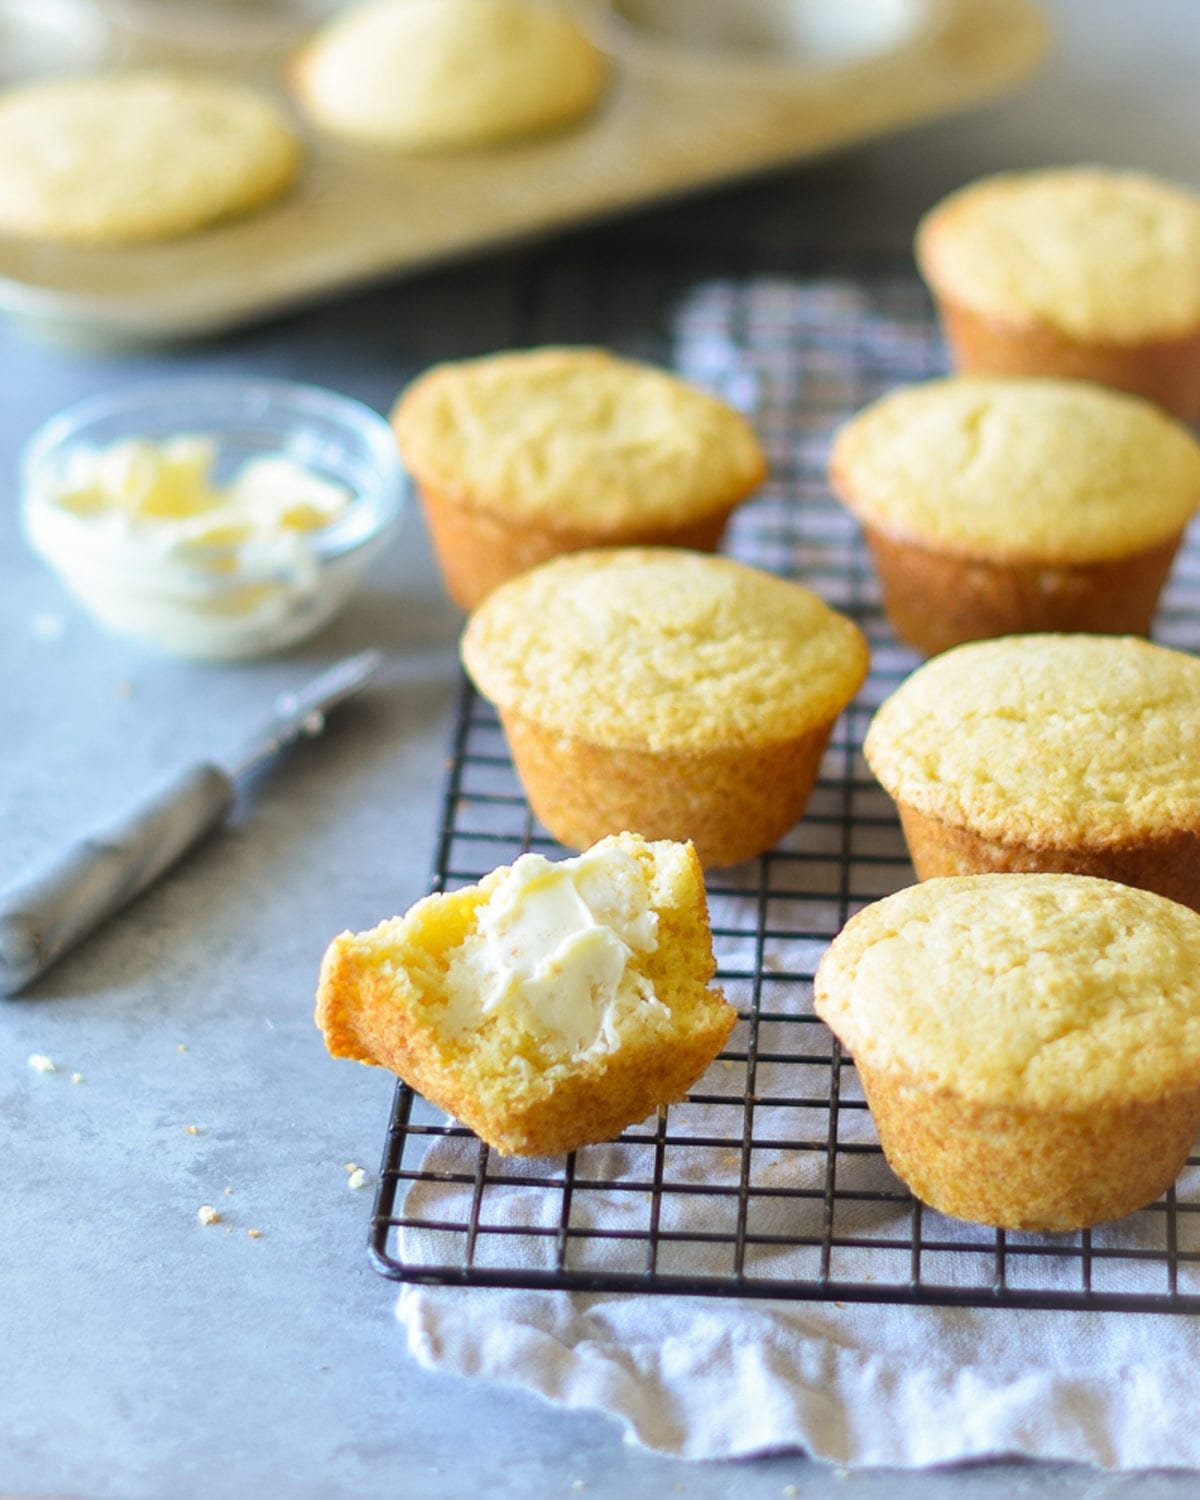 17 amazing recipes you can make in a muffin pan